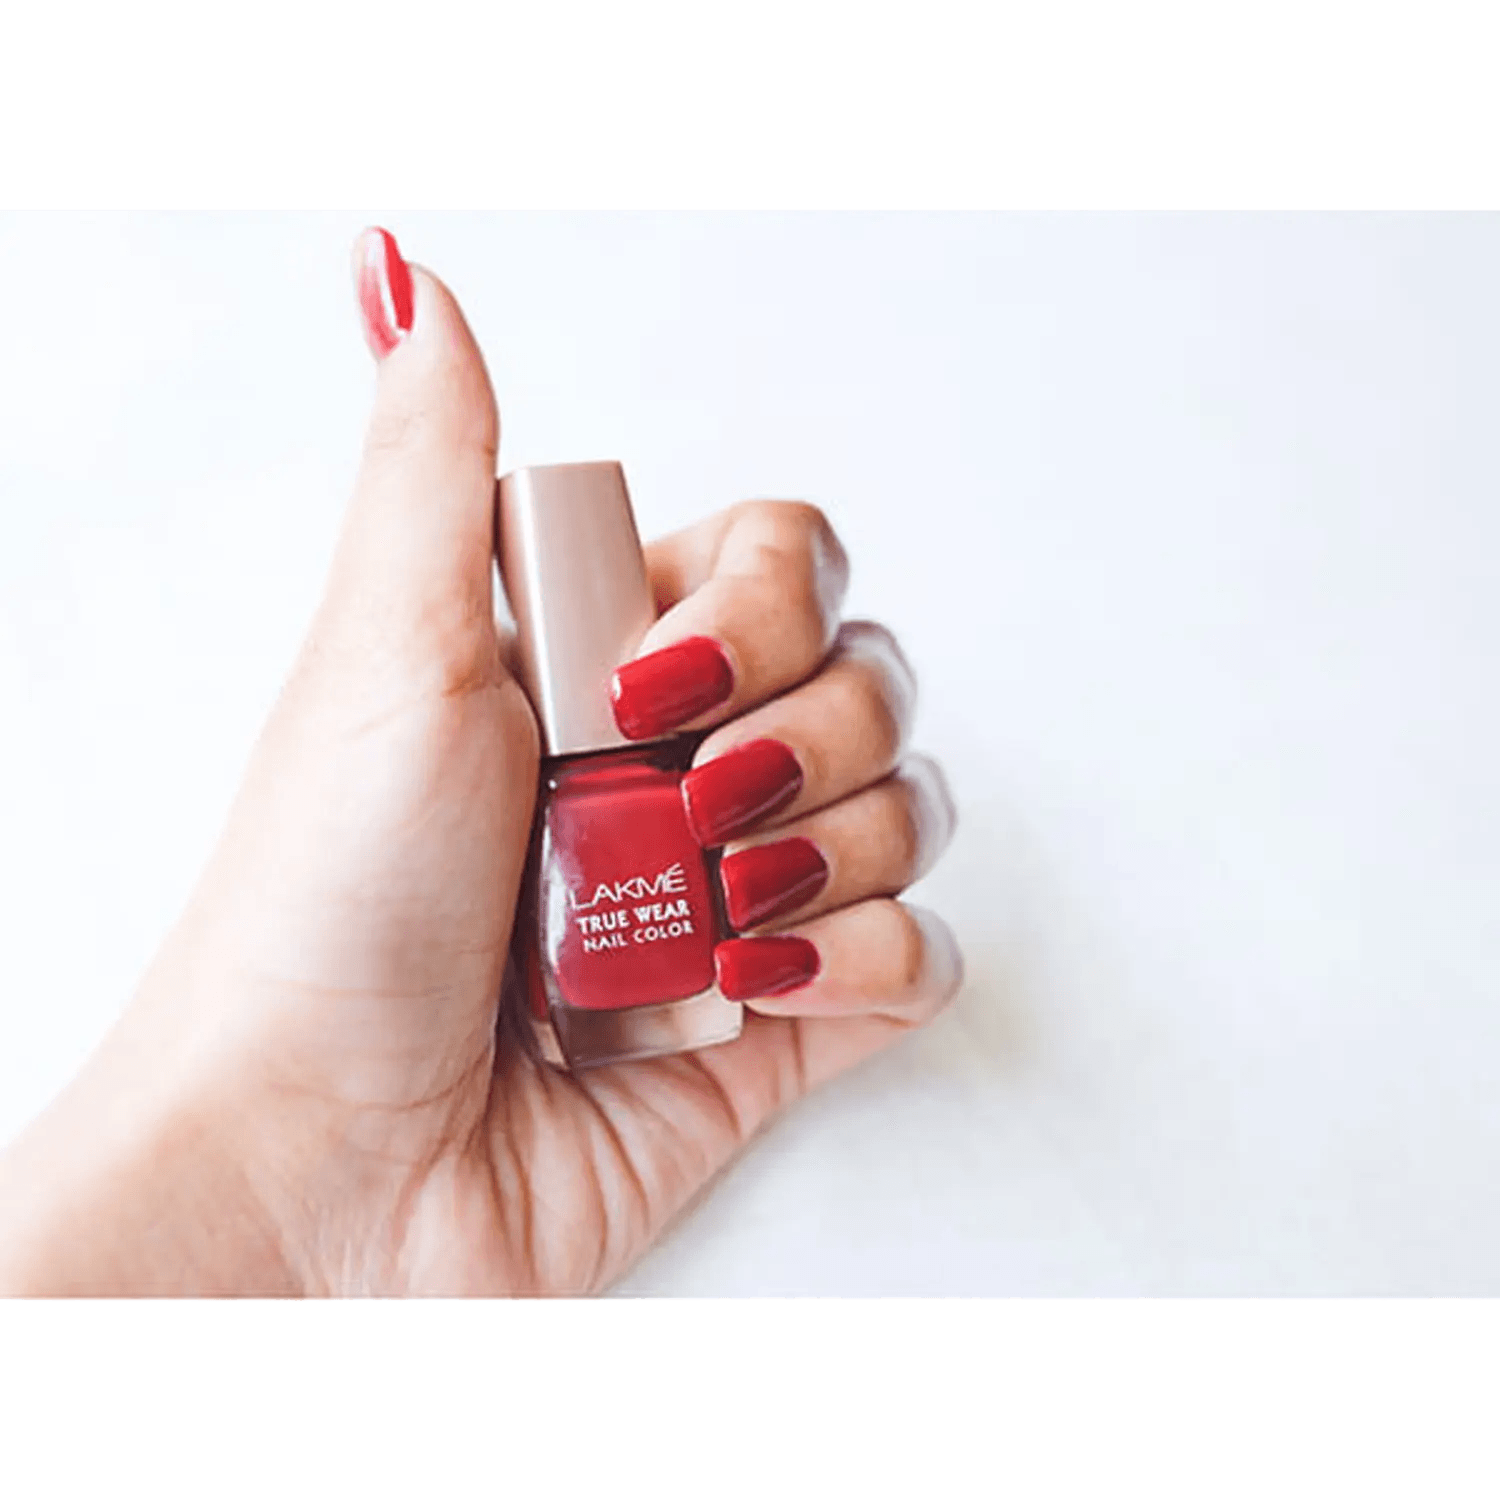 LAKME Color Crush Nail Art in Allahabad at best price by Lakme Salon -  Justdial